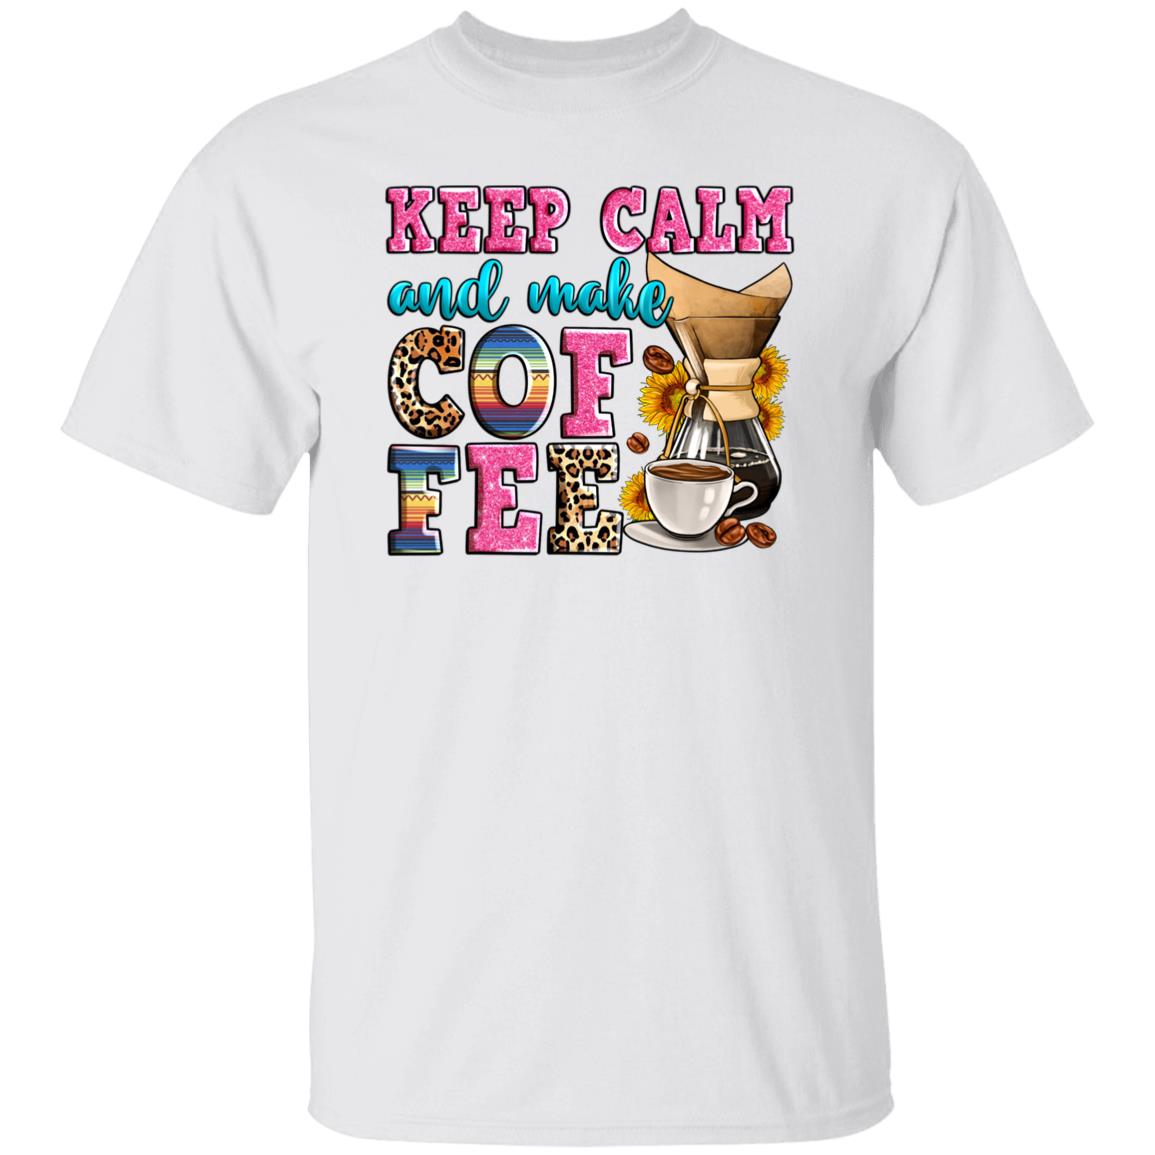 Keep calm and make coffee T-Shirt gift Coffee lover Unisex tee Sand White Sport Grey-Family-Gift-Planet